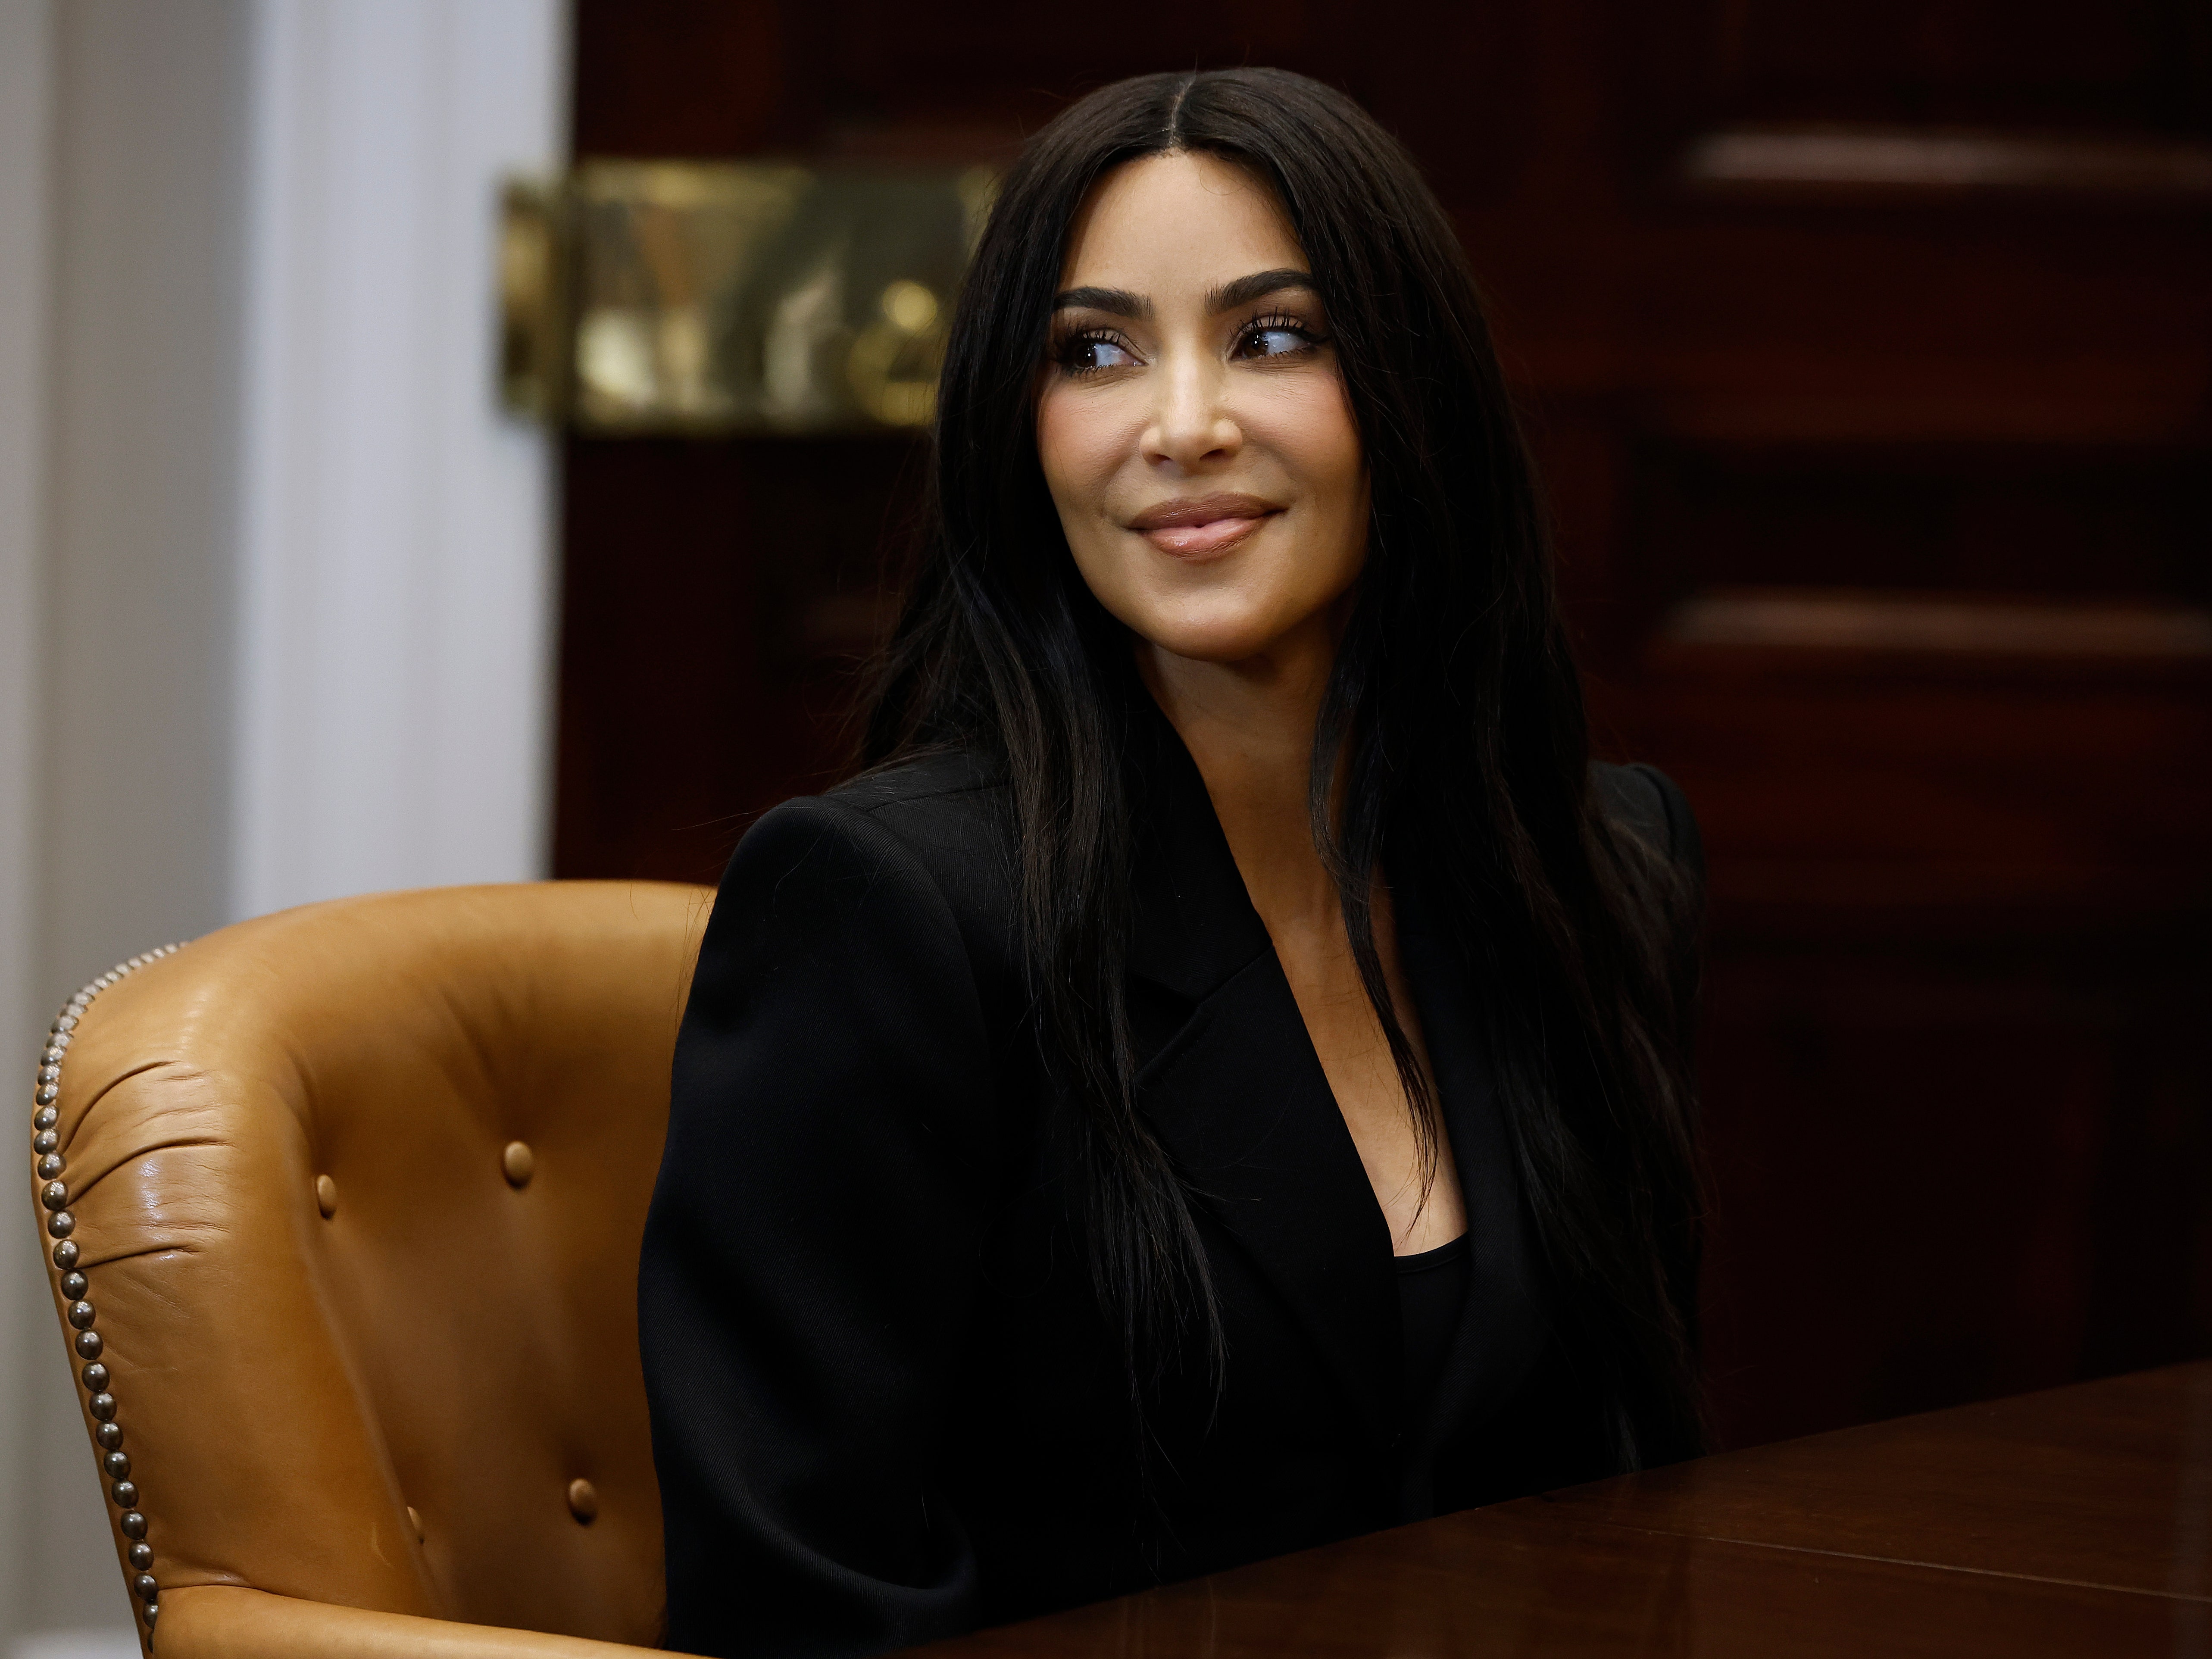 Kim Kardashian Will Play a Divorce Attorney in Ryan Murphy’s Next Drama, With Halle Berry and Glenn Close in Tow